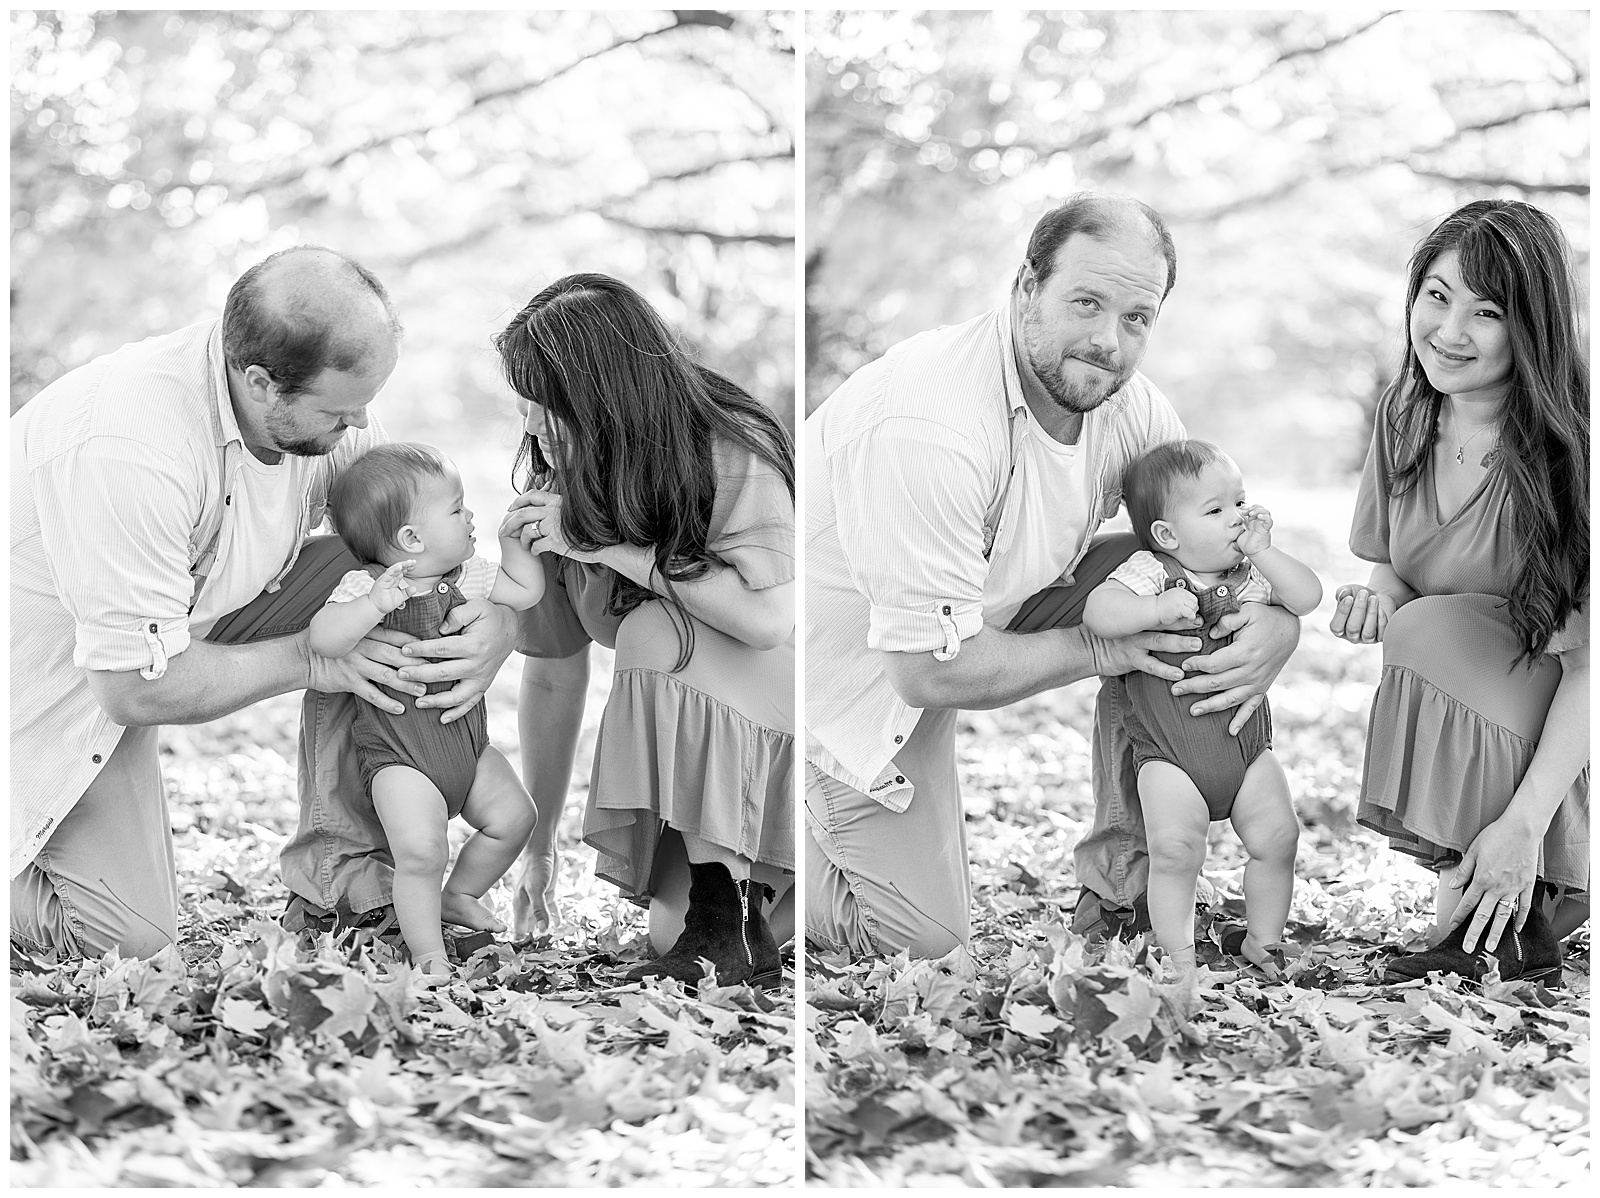 Baby-boy First birthday session by Nilo Burke Photography